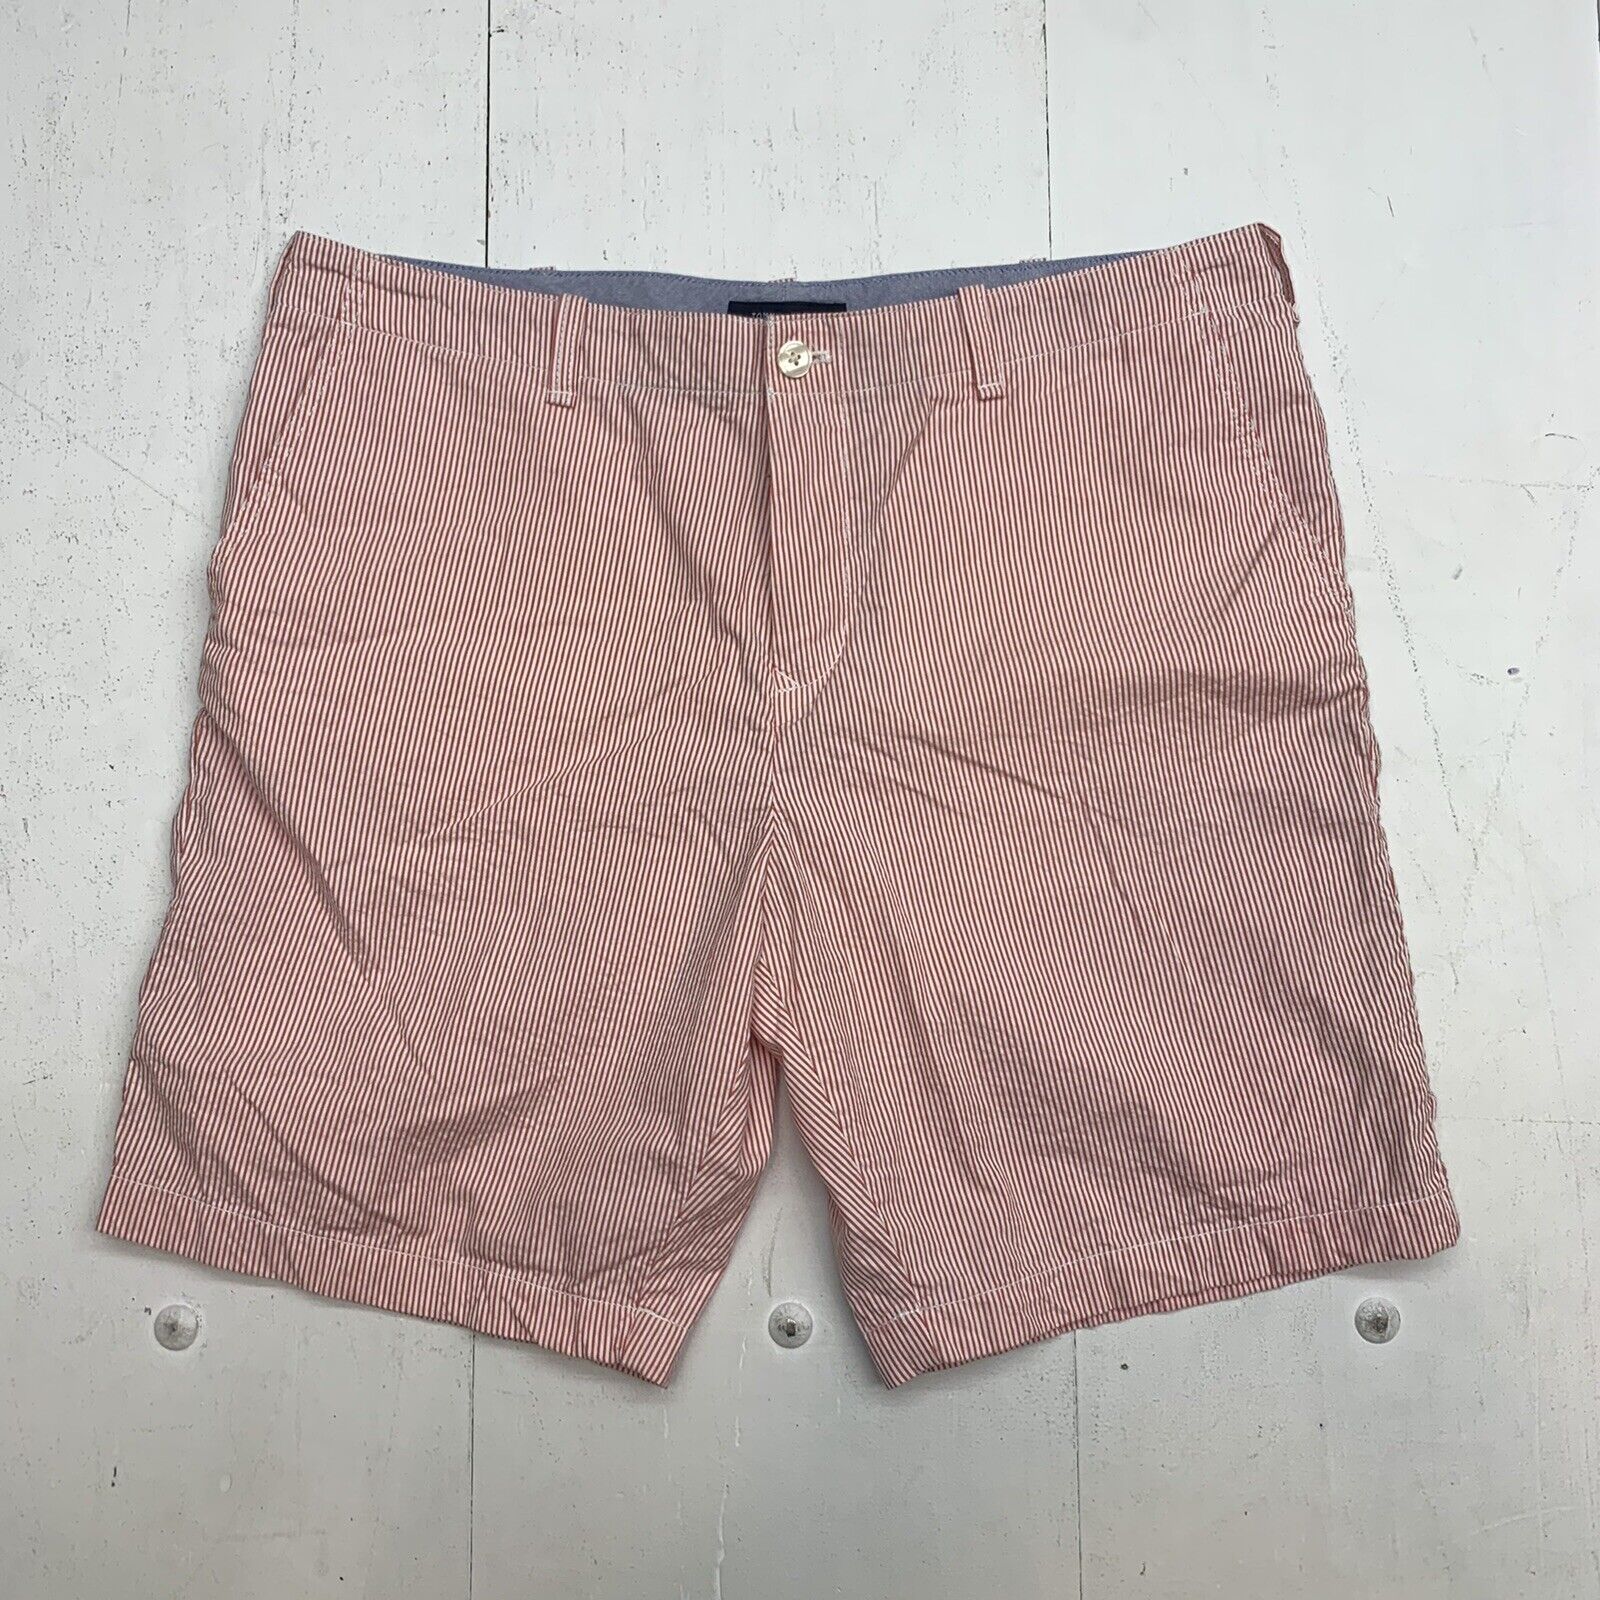 Tommy Hilfiger Classic Fit Red Shorts Mens Size 33 - beyond exchange